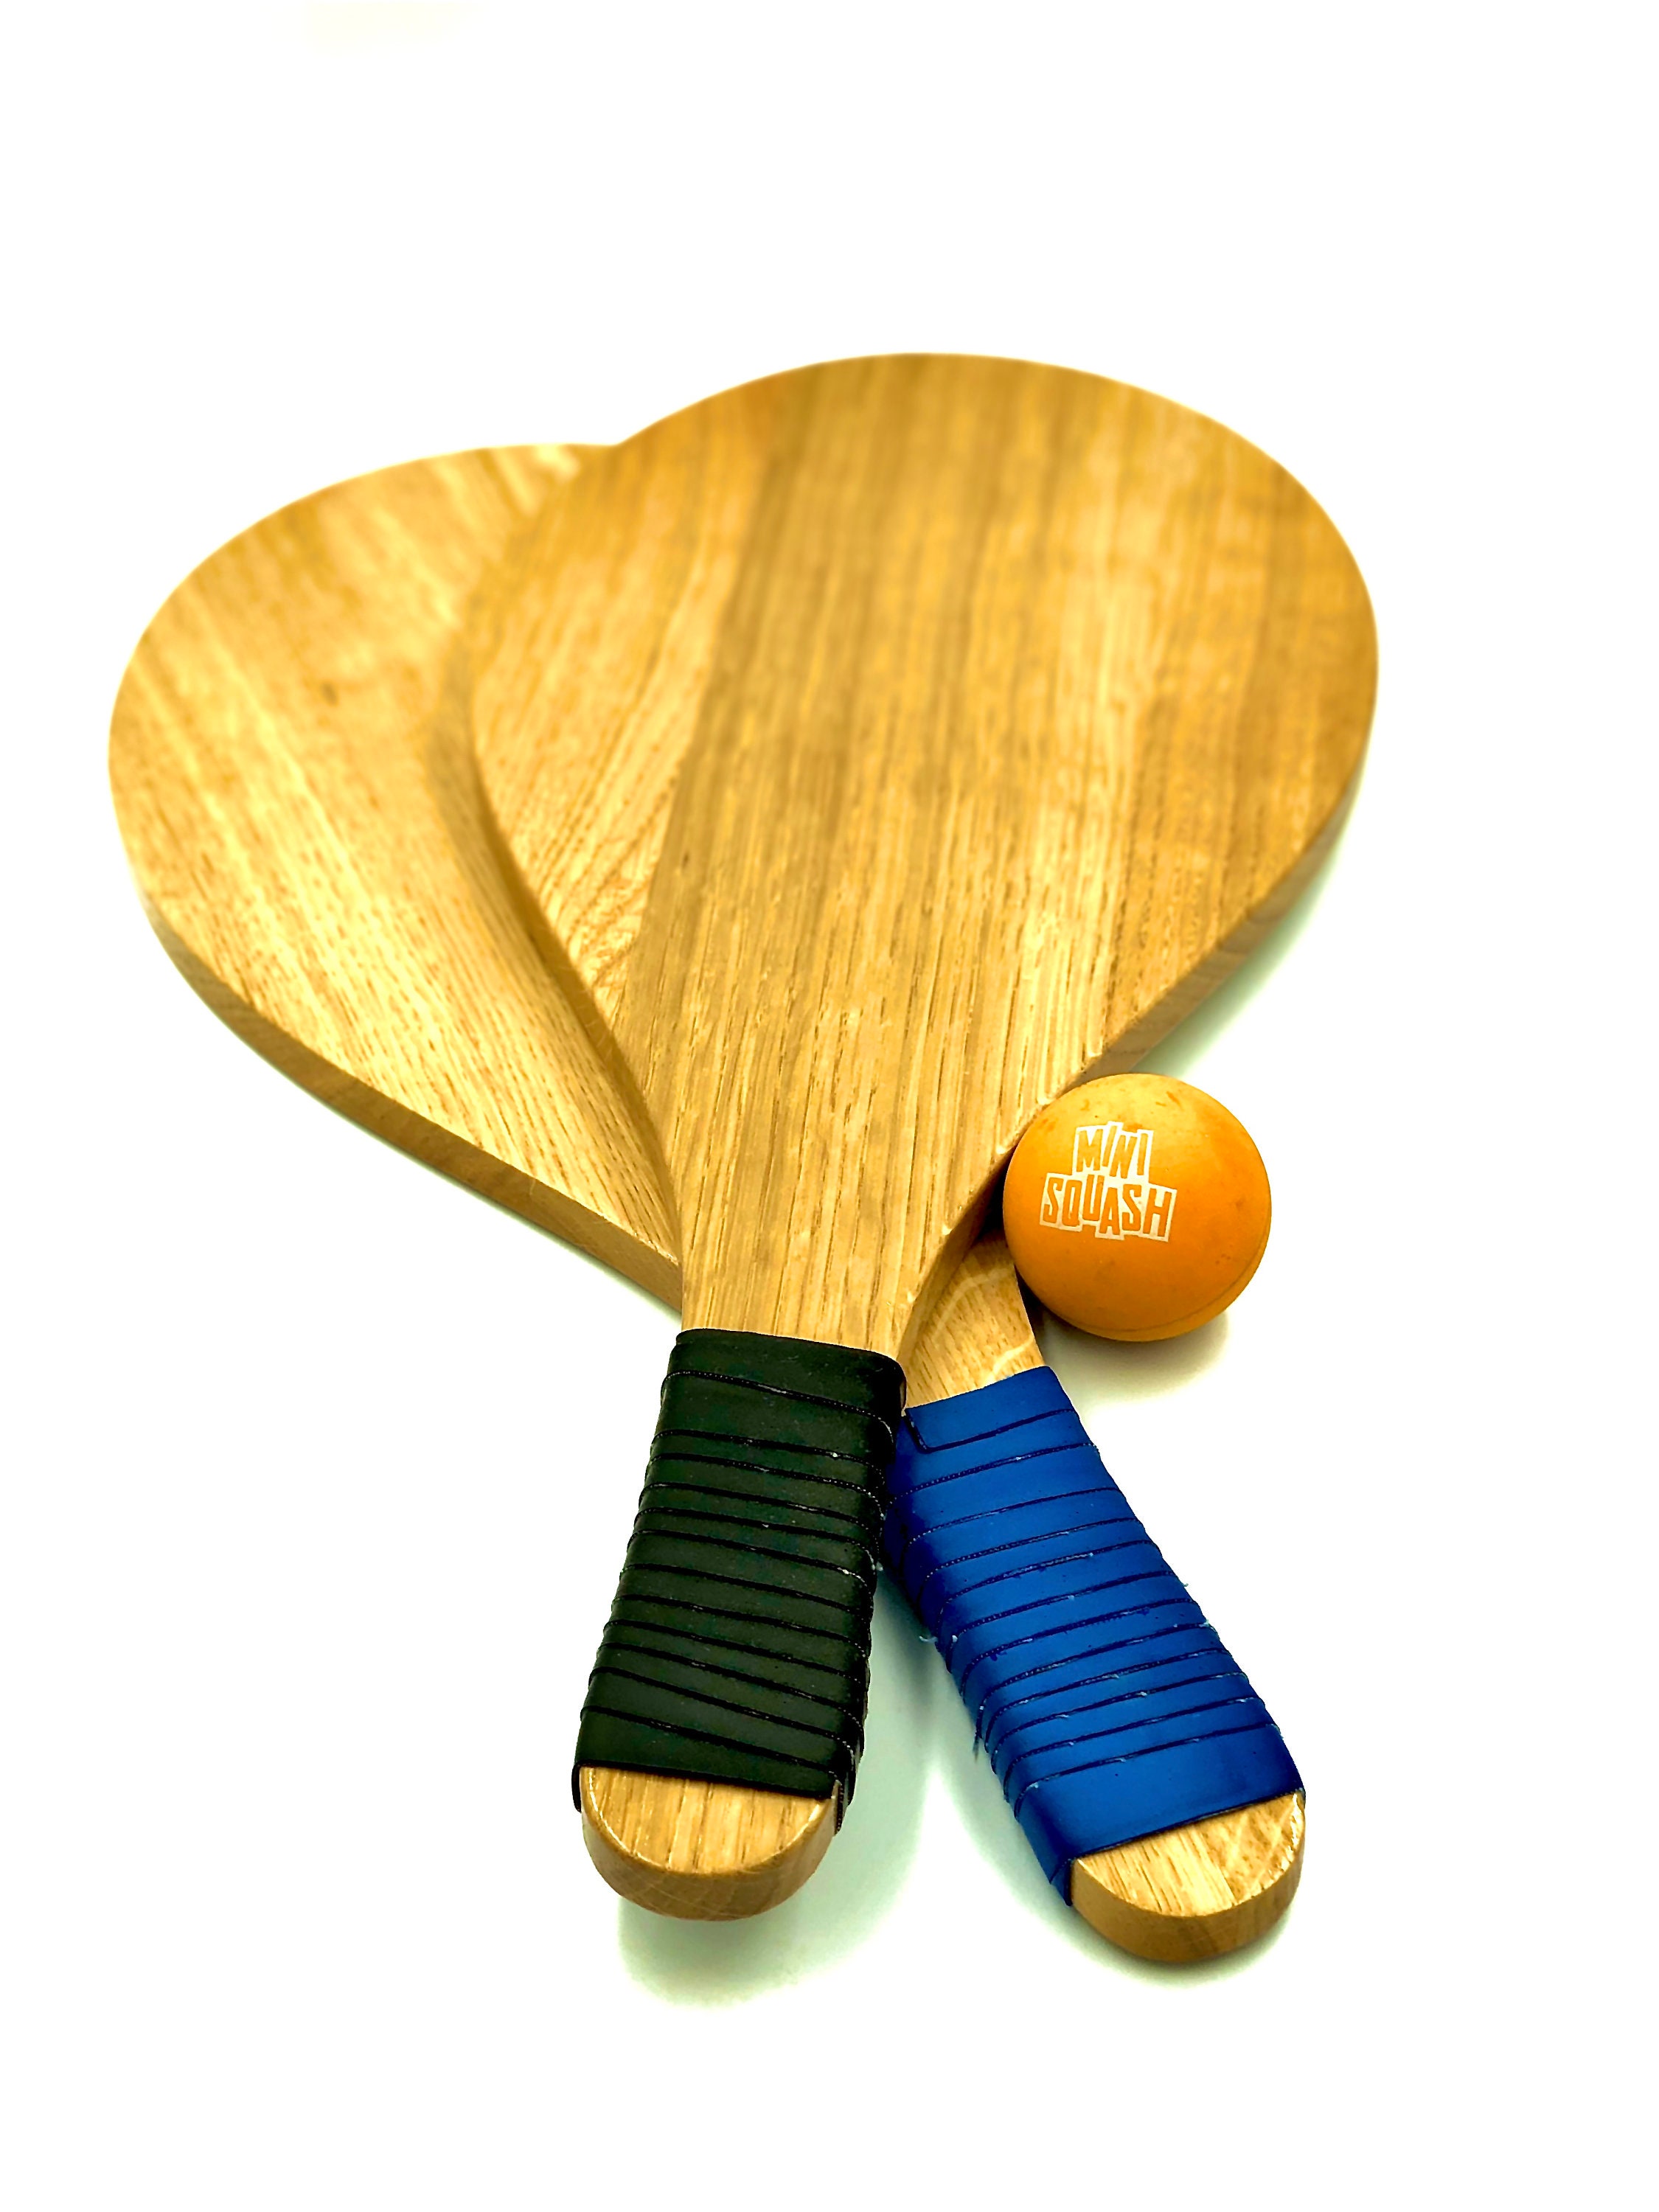 Miniature Ping Pong Table Paddle Set Sport Miniatures 